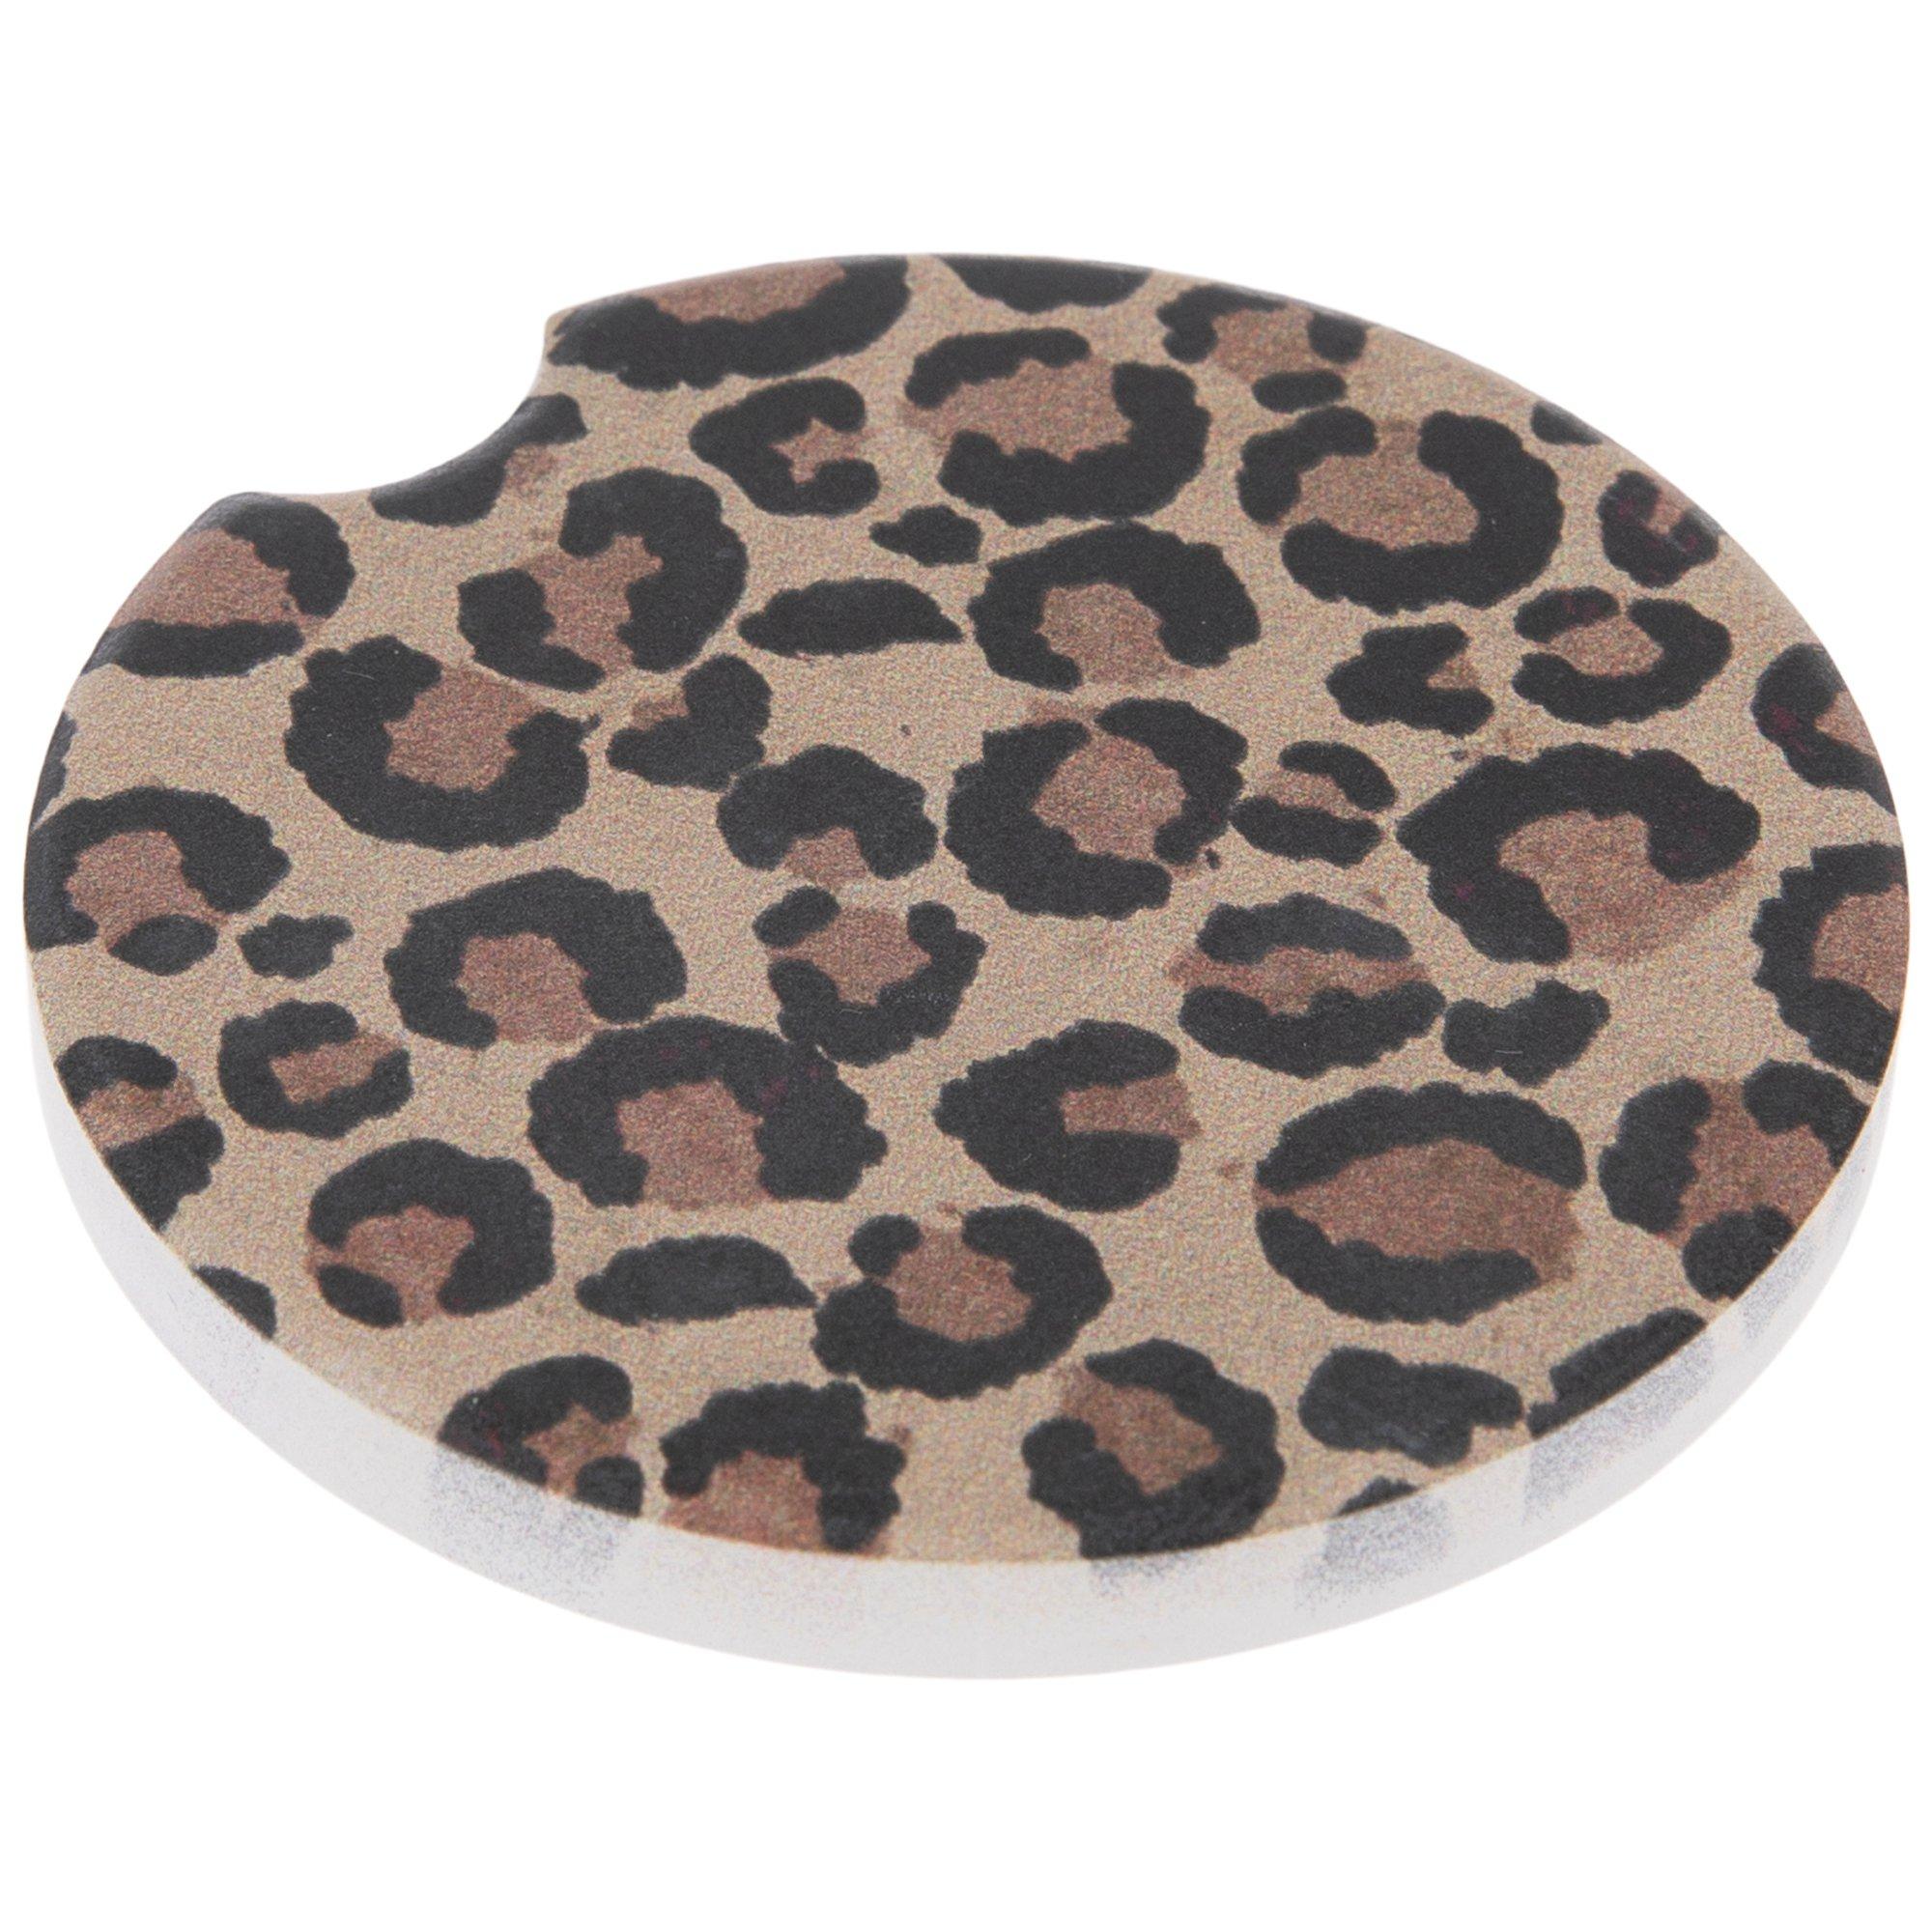 Set of Two Neoprene Car Coasters Leopard Car Coaster Bull Skull Car Coaster  Cactus Car Coaster Car Cup Holder Coaster Rubber 